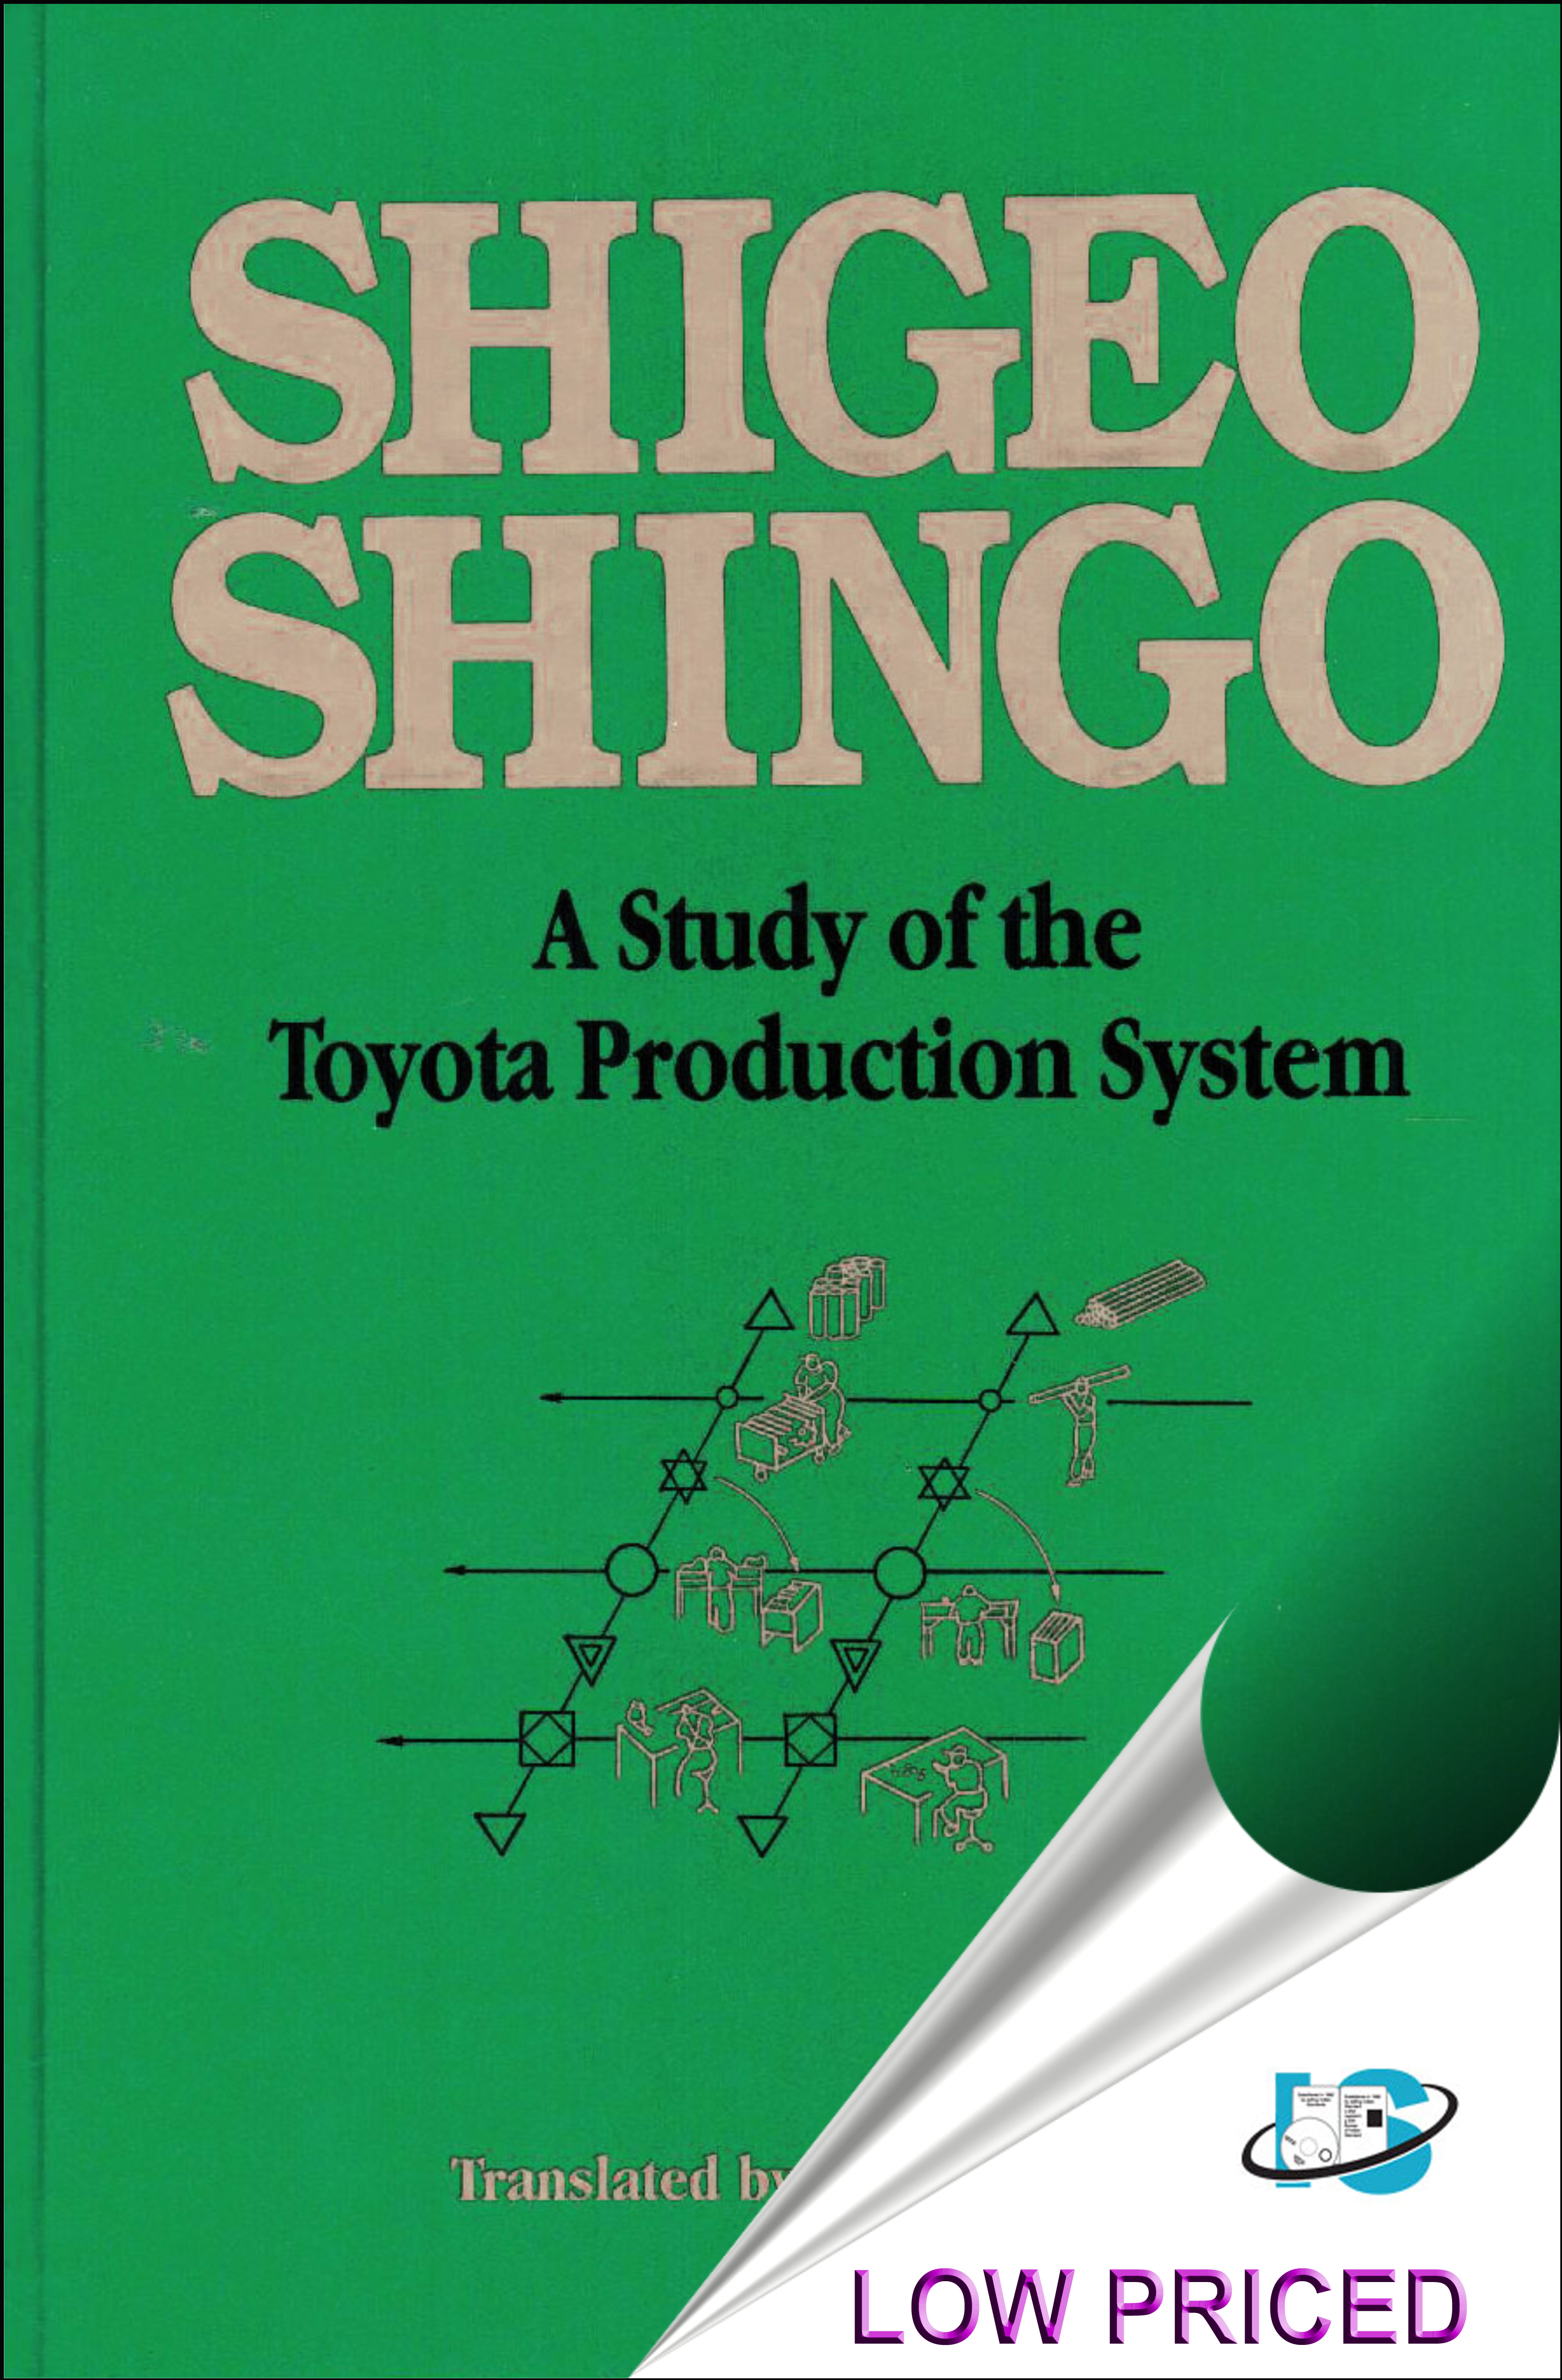 engineering from industrial production study system toyota viewpoint #3